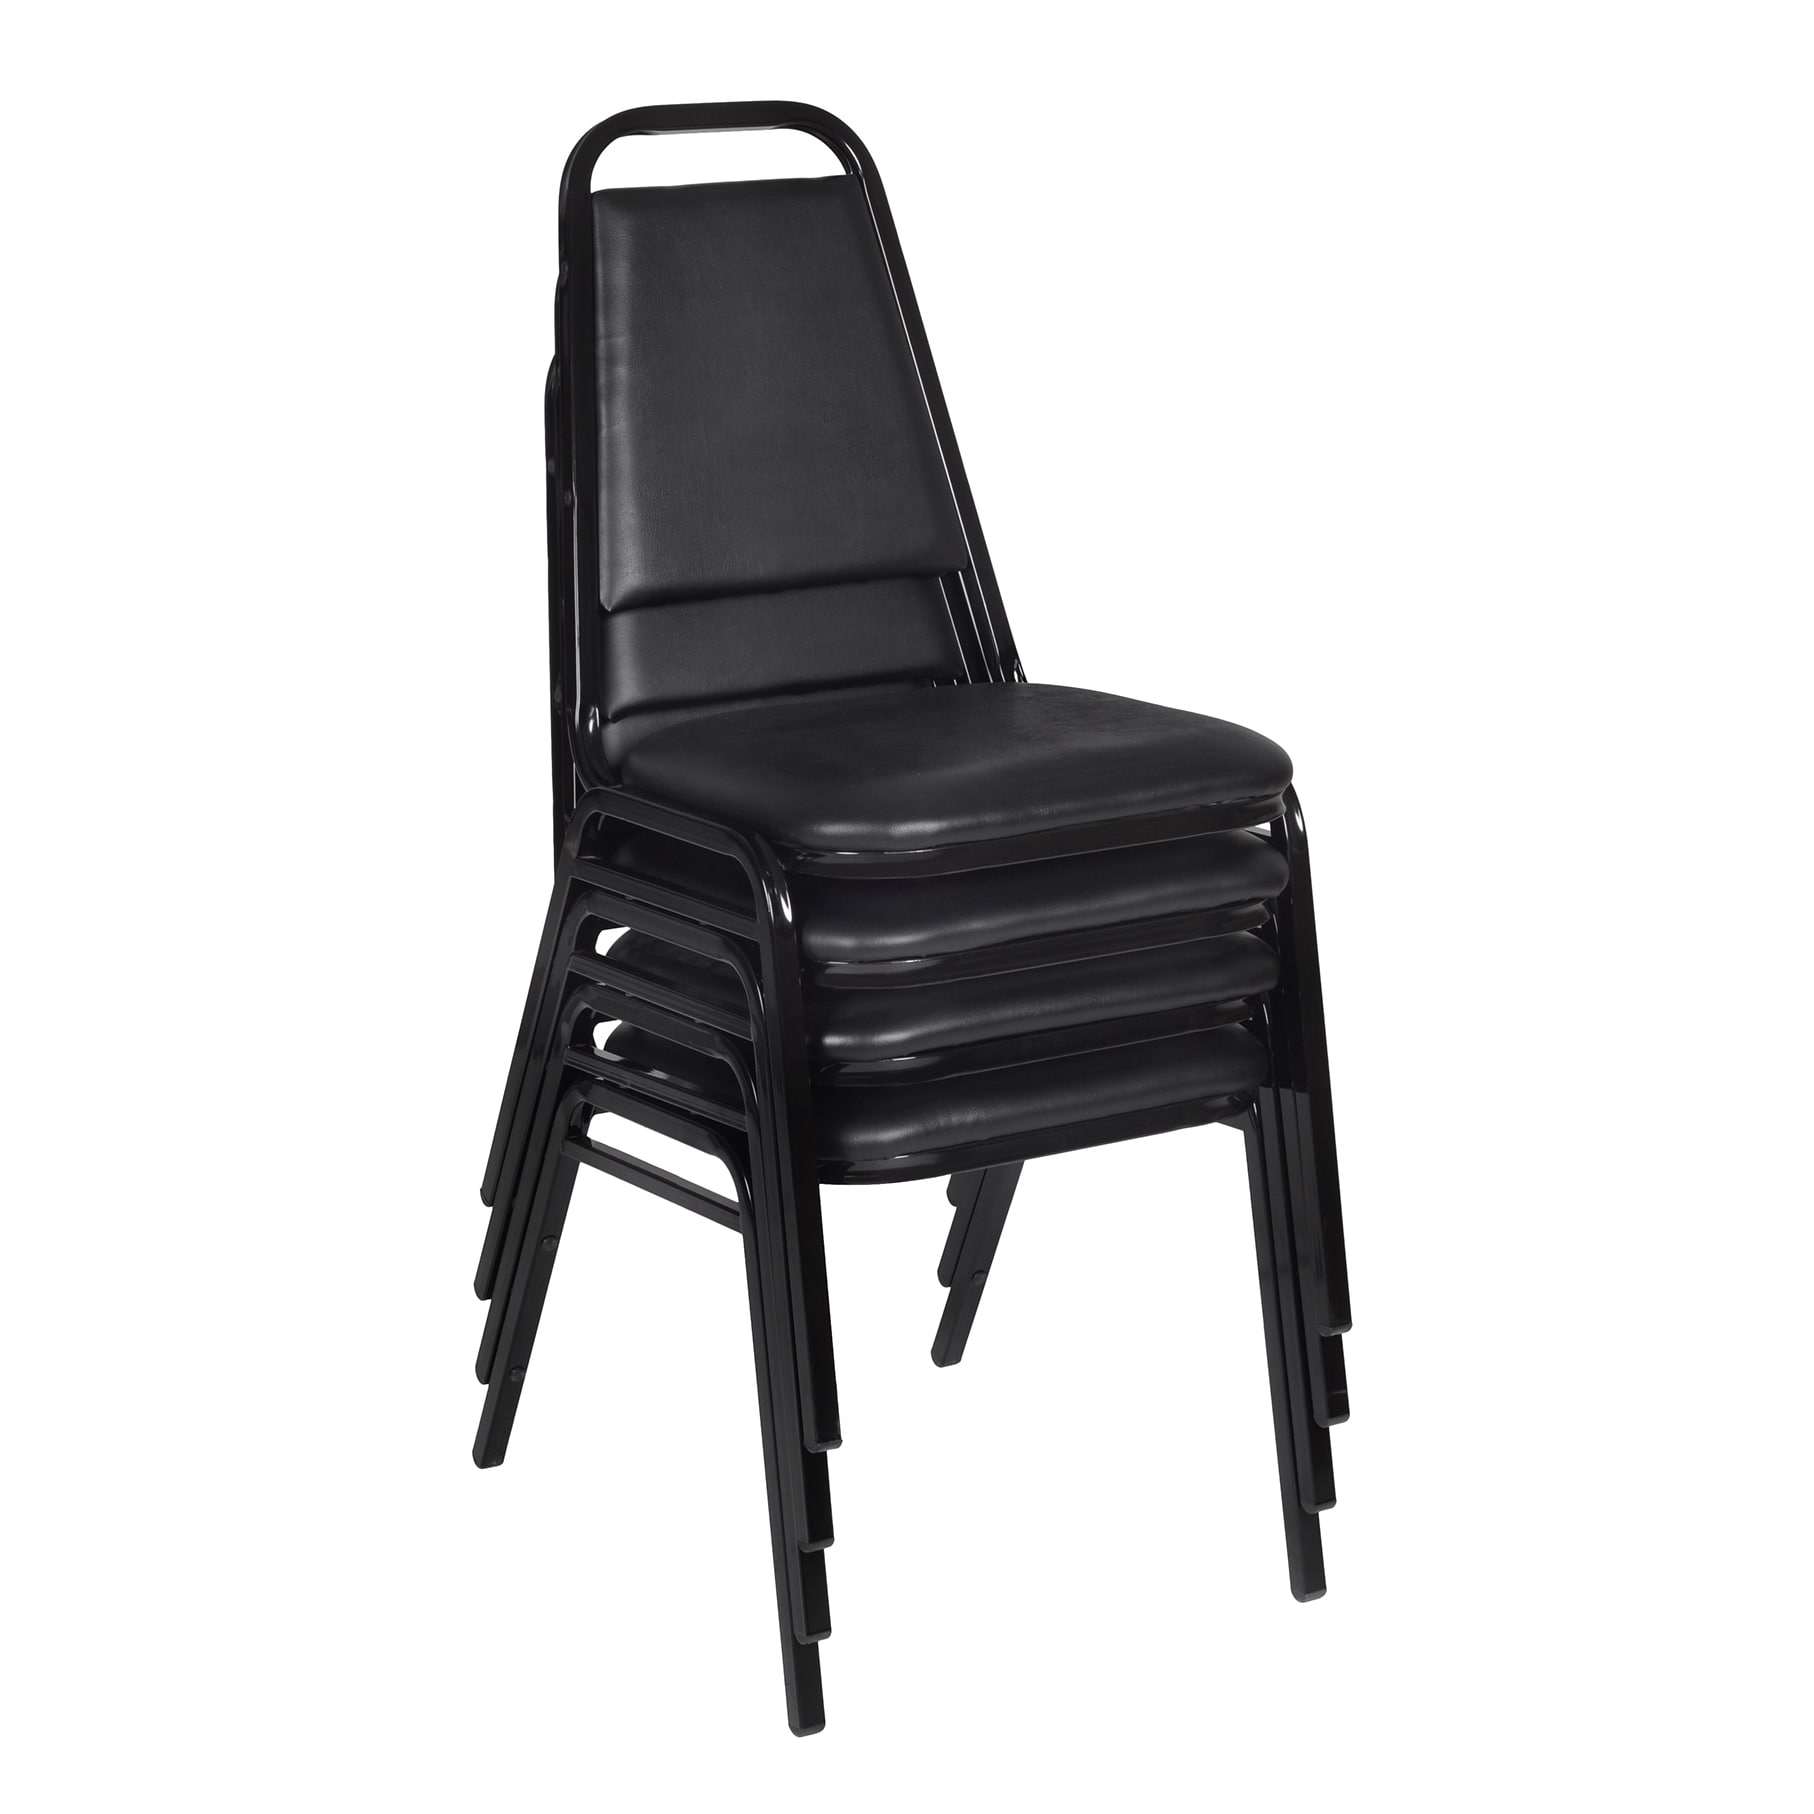 Black Metal Restaurant Stack Chairs (Set of 4